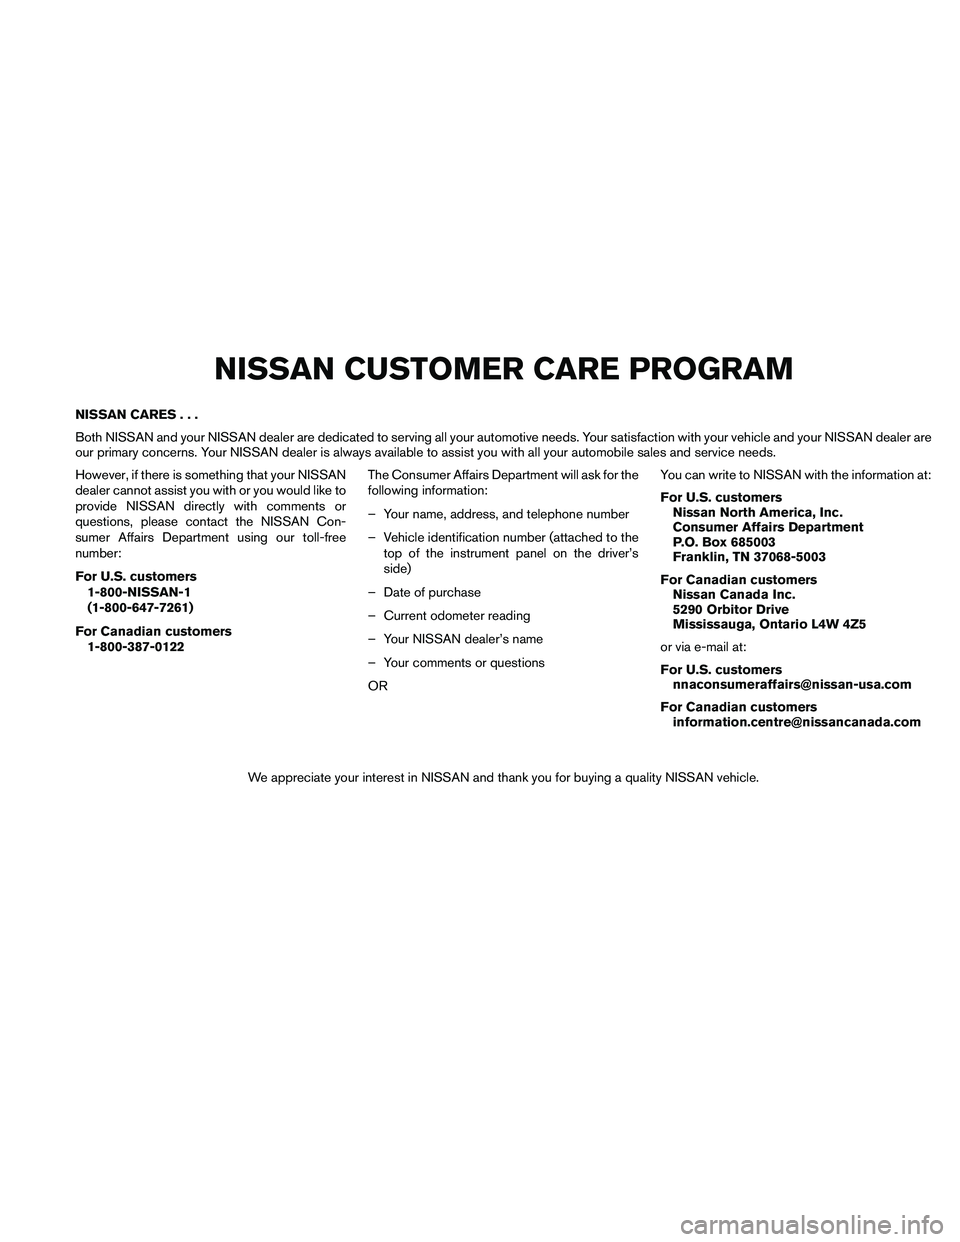 NISSAN MAXIMA 2011  Owner´s Manual NISSAN CARES...
Both NISSAN and your NISSAN dealer are dedicated to serving all your automotive needs. Your satisfaction with your vehicle and your NISSAN dealer are
our primary concerns. Your NISSAN 